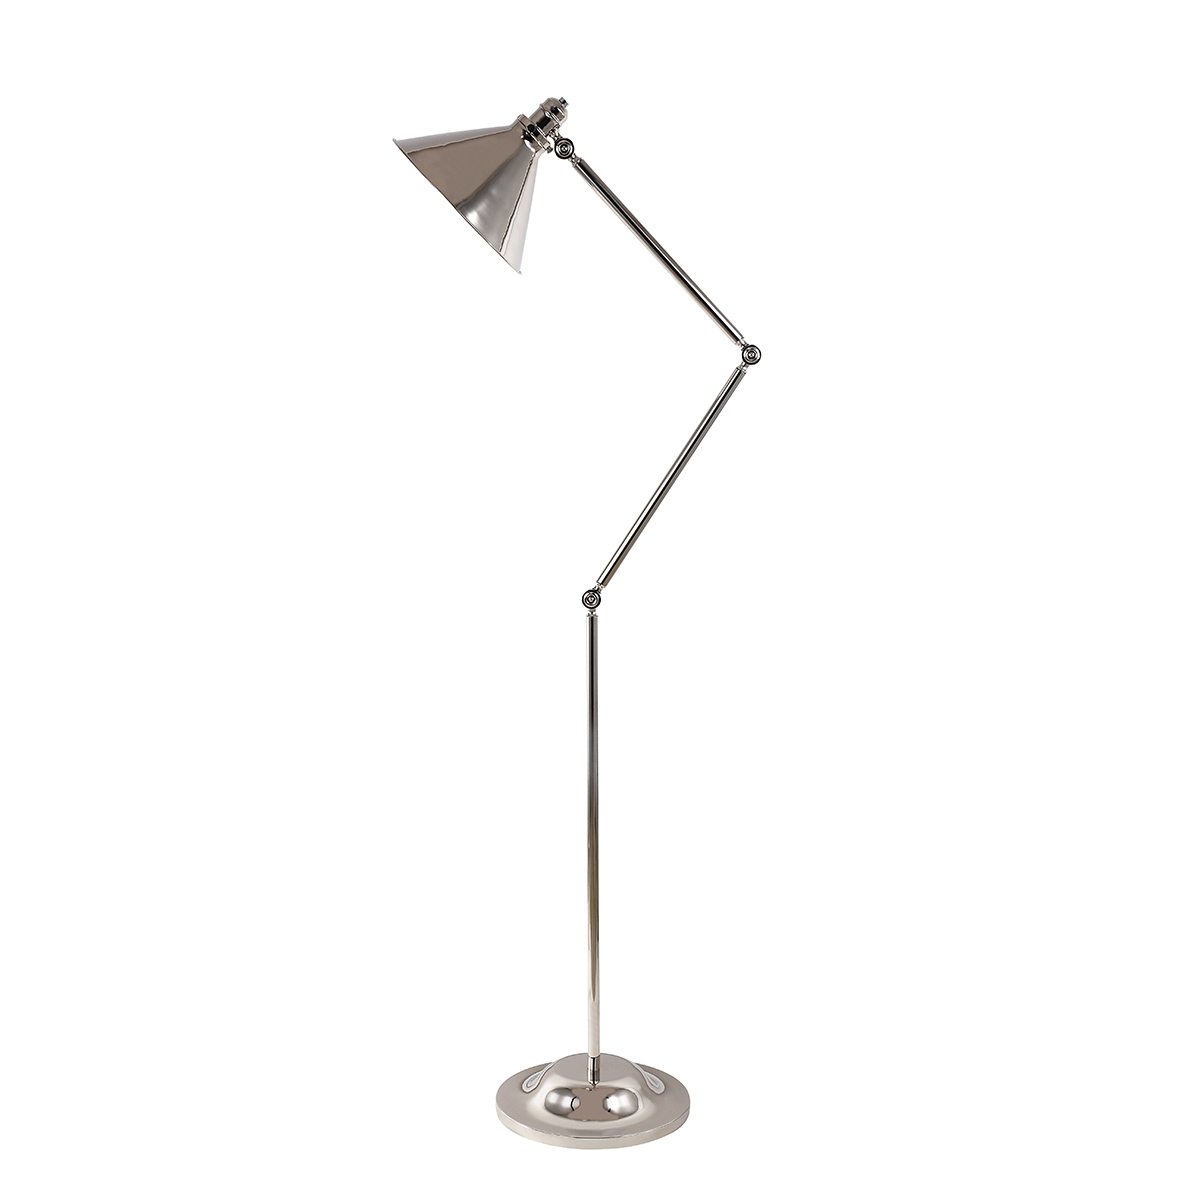 Details About Elstead Provence 1lt Floor Lamp Polished Nickel 1 X 100w E27 220 240v 50hz with measurements 1200 X 1200